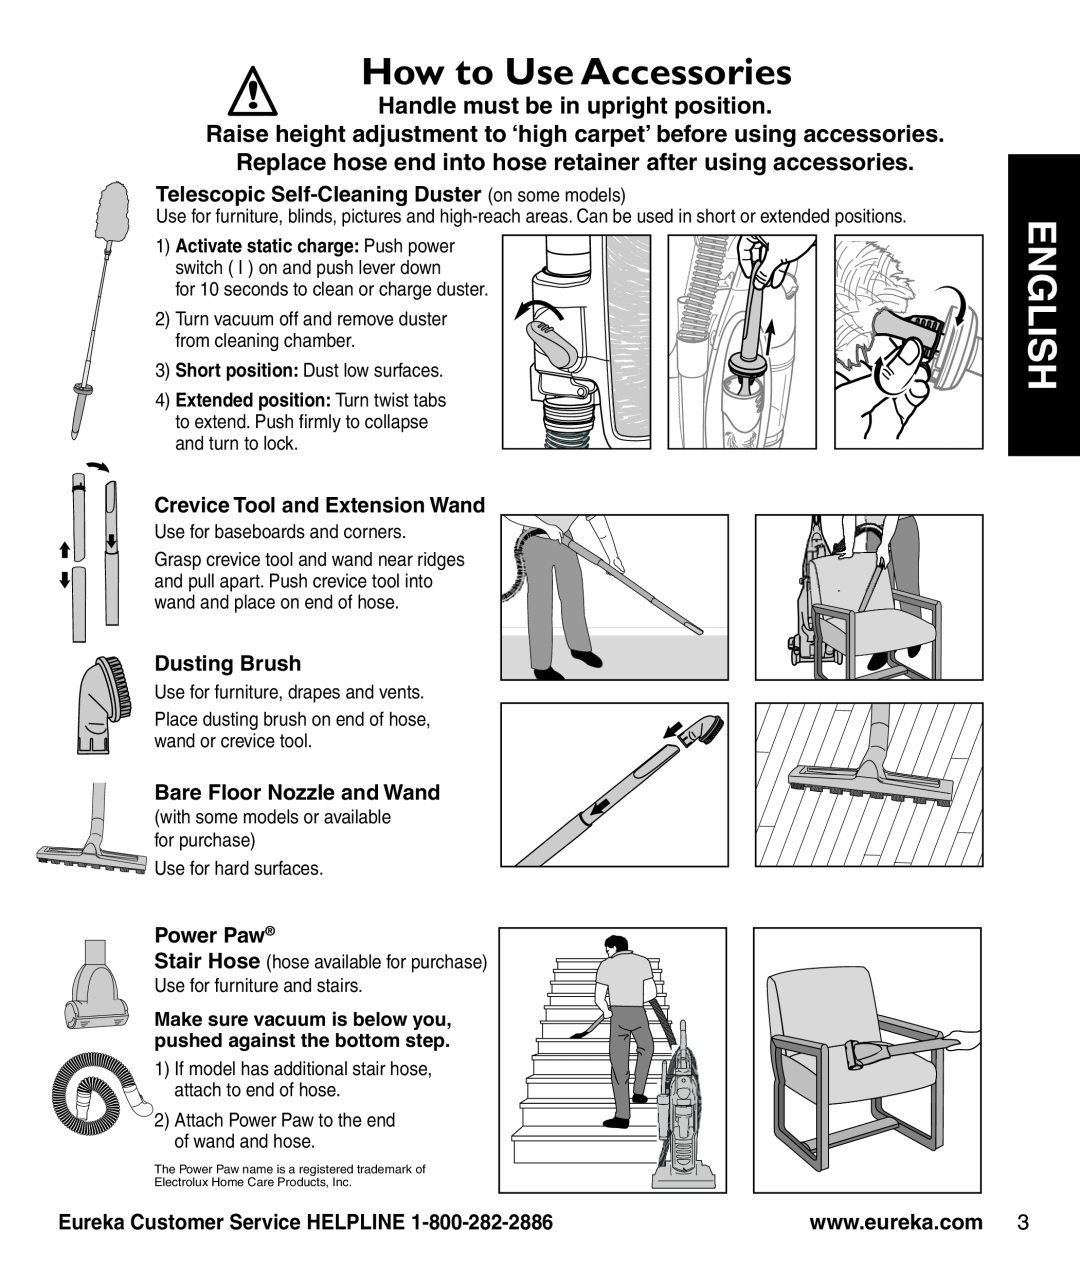 Eureka 3270 Series How to Use Accessories, Raise height adjustment to ‘high carpet’ before using accessories, Power Paw 